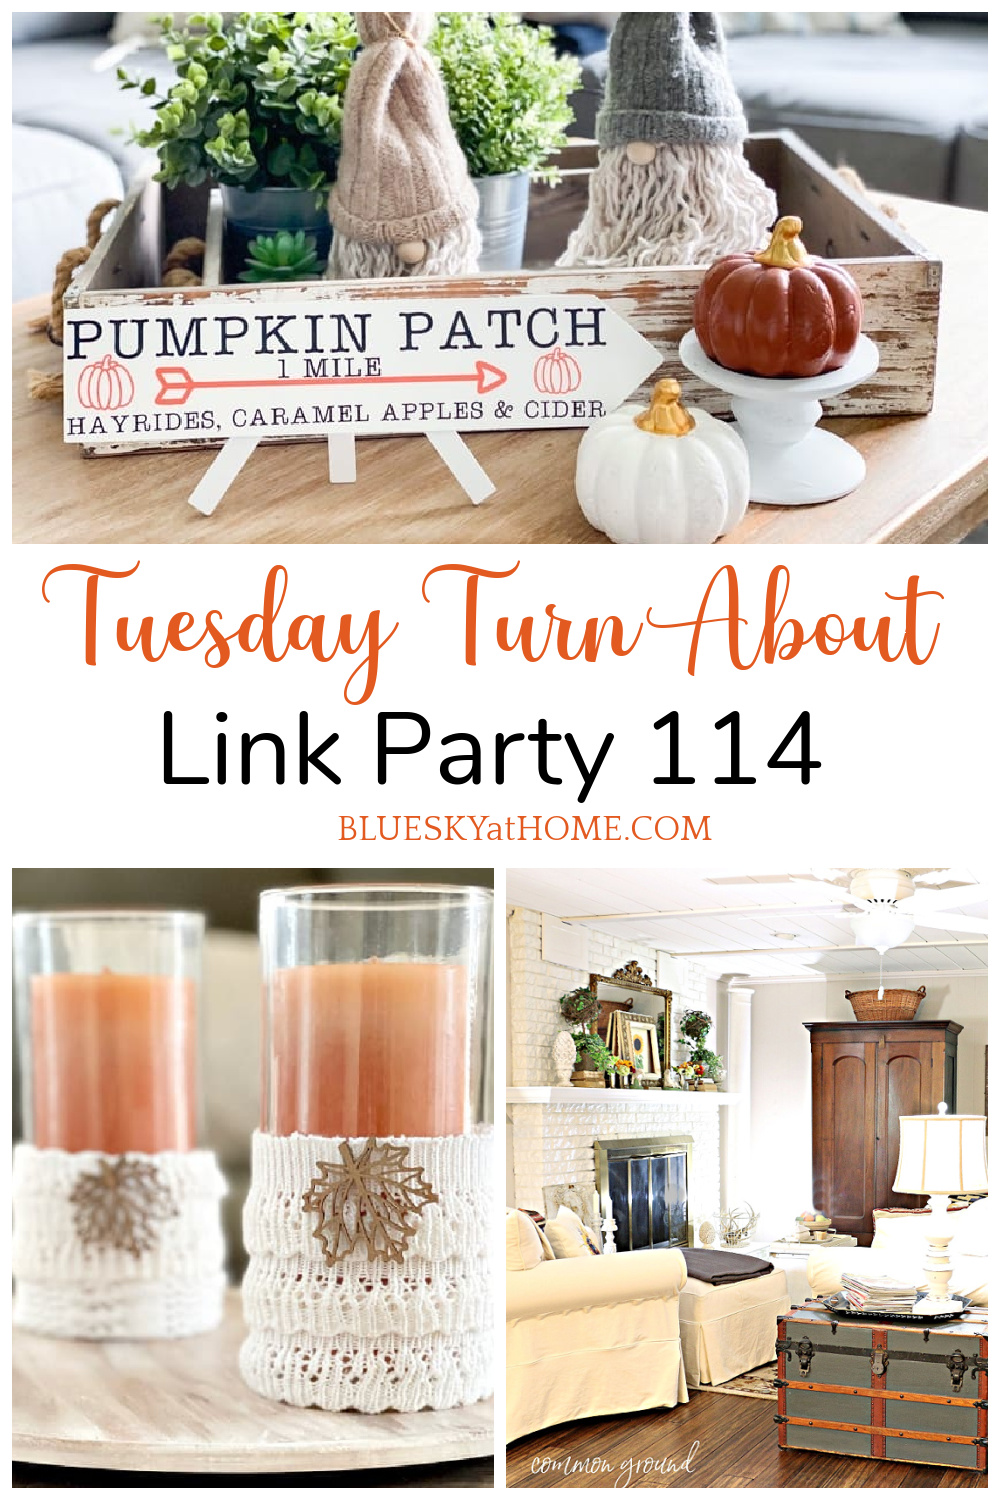 Tuesday Turn About Link Party 114